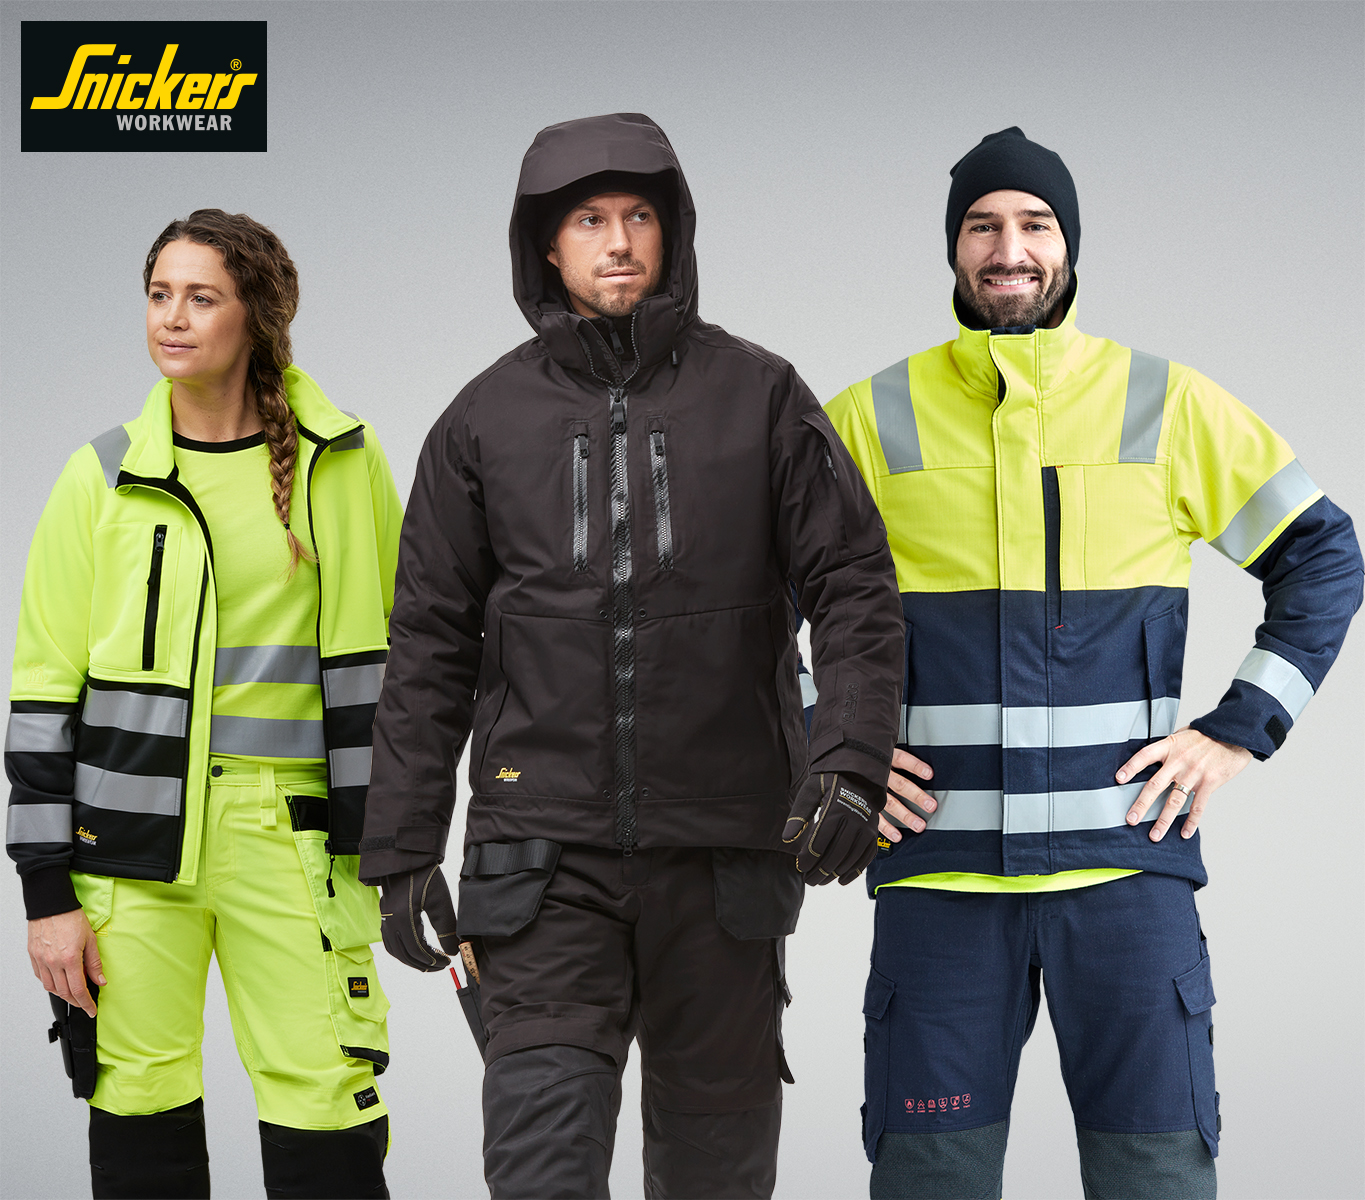 Snickers Workwear launch new ProtecWork Protective Clothing - PCIAW®